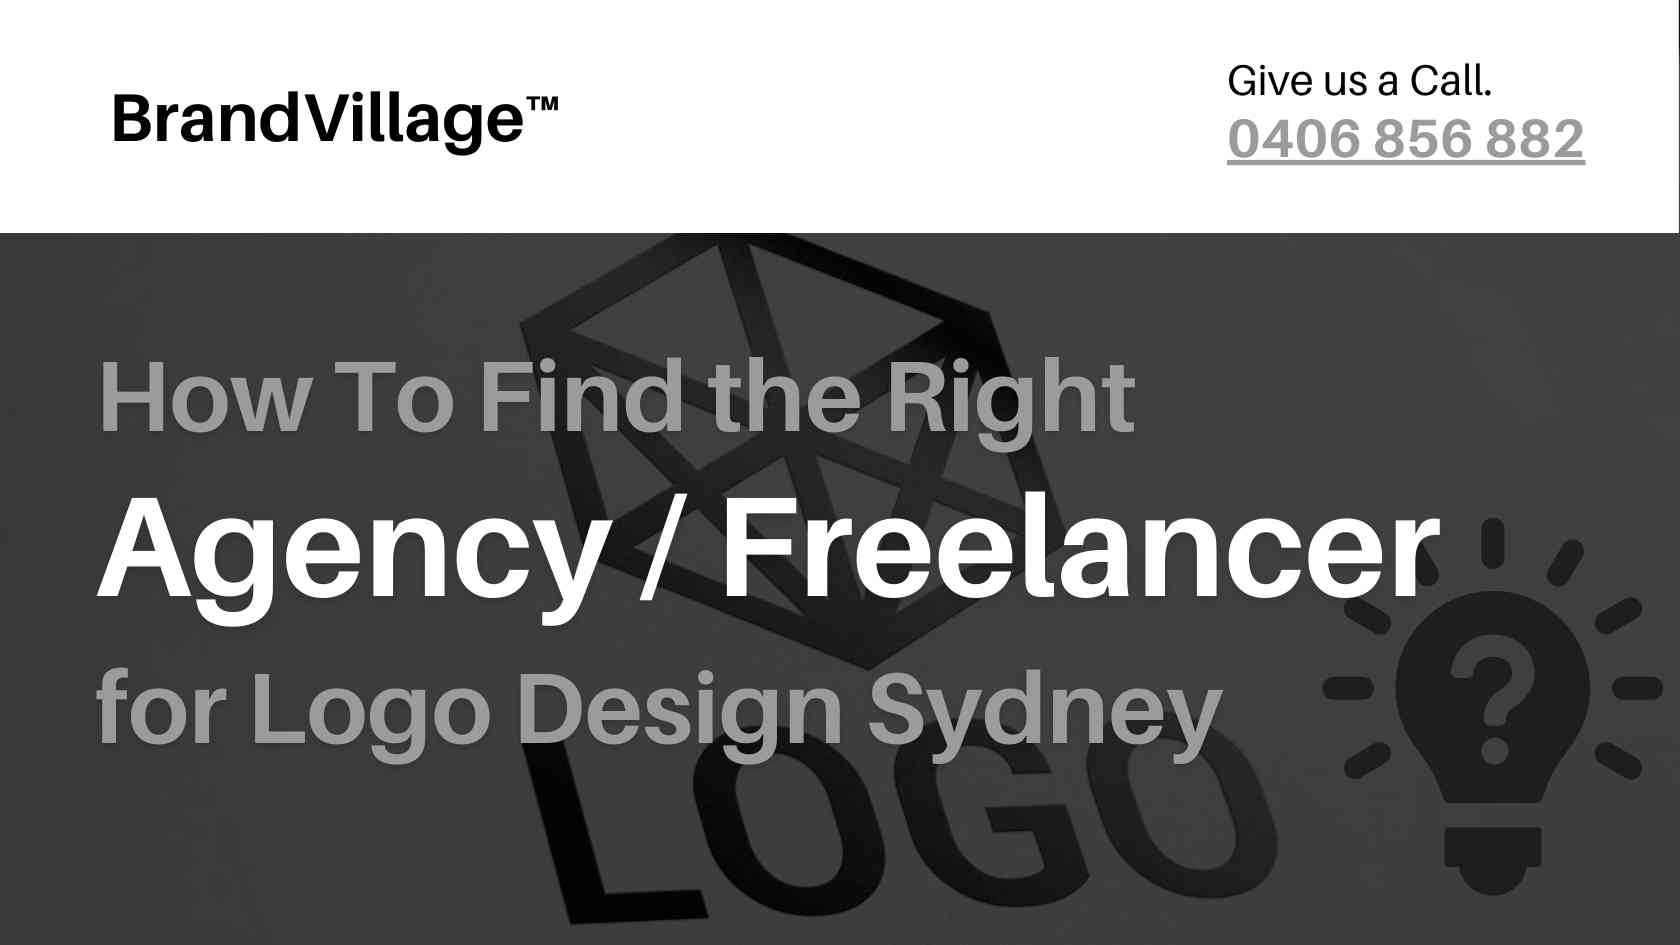 How To Find the Right Agency/Freelancer for Logo Design Sydney